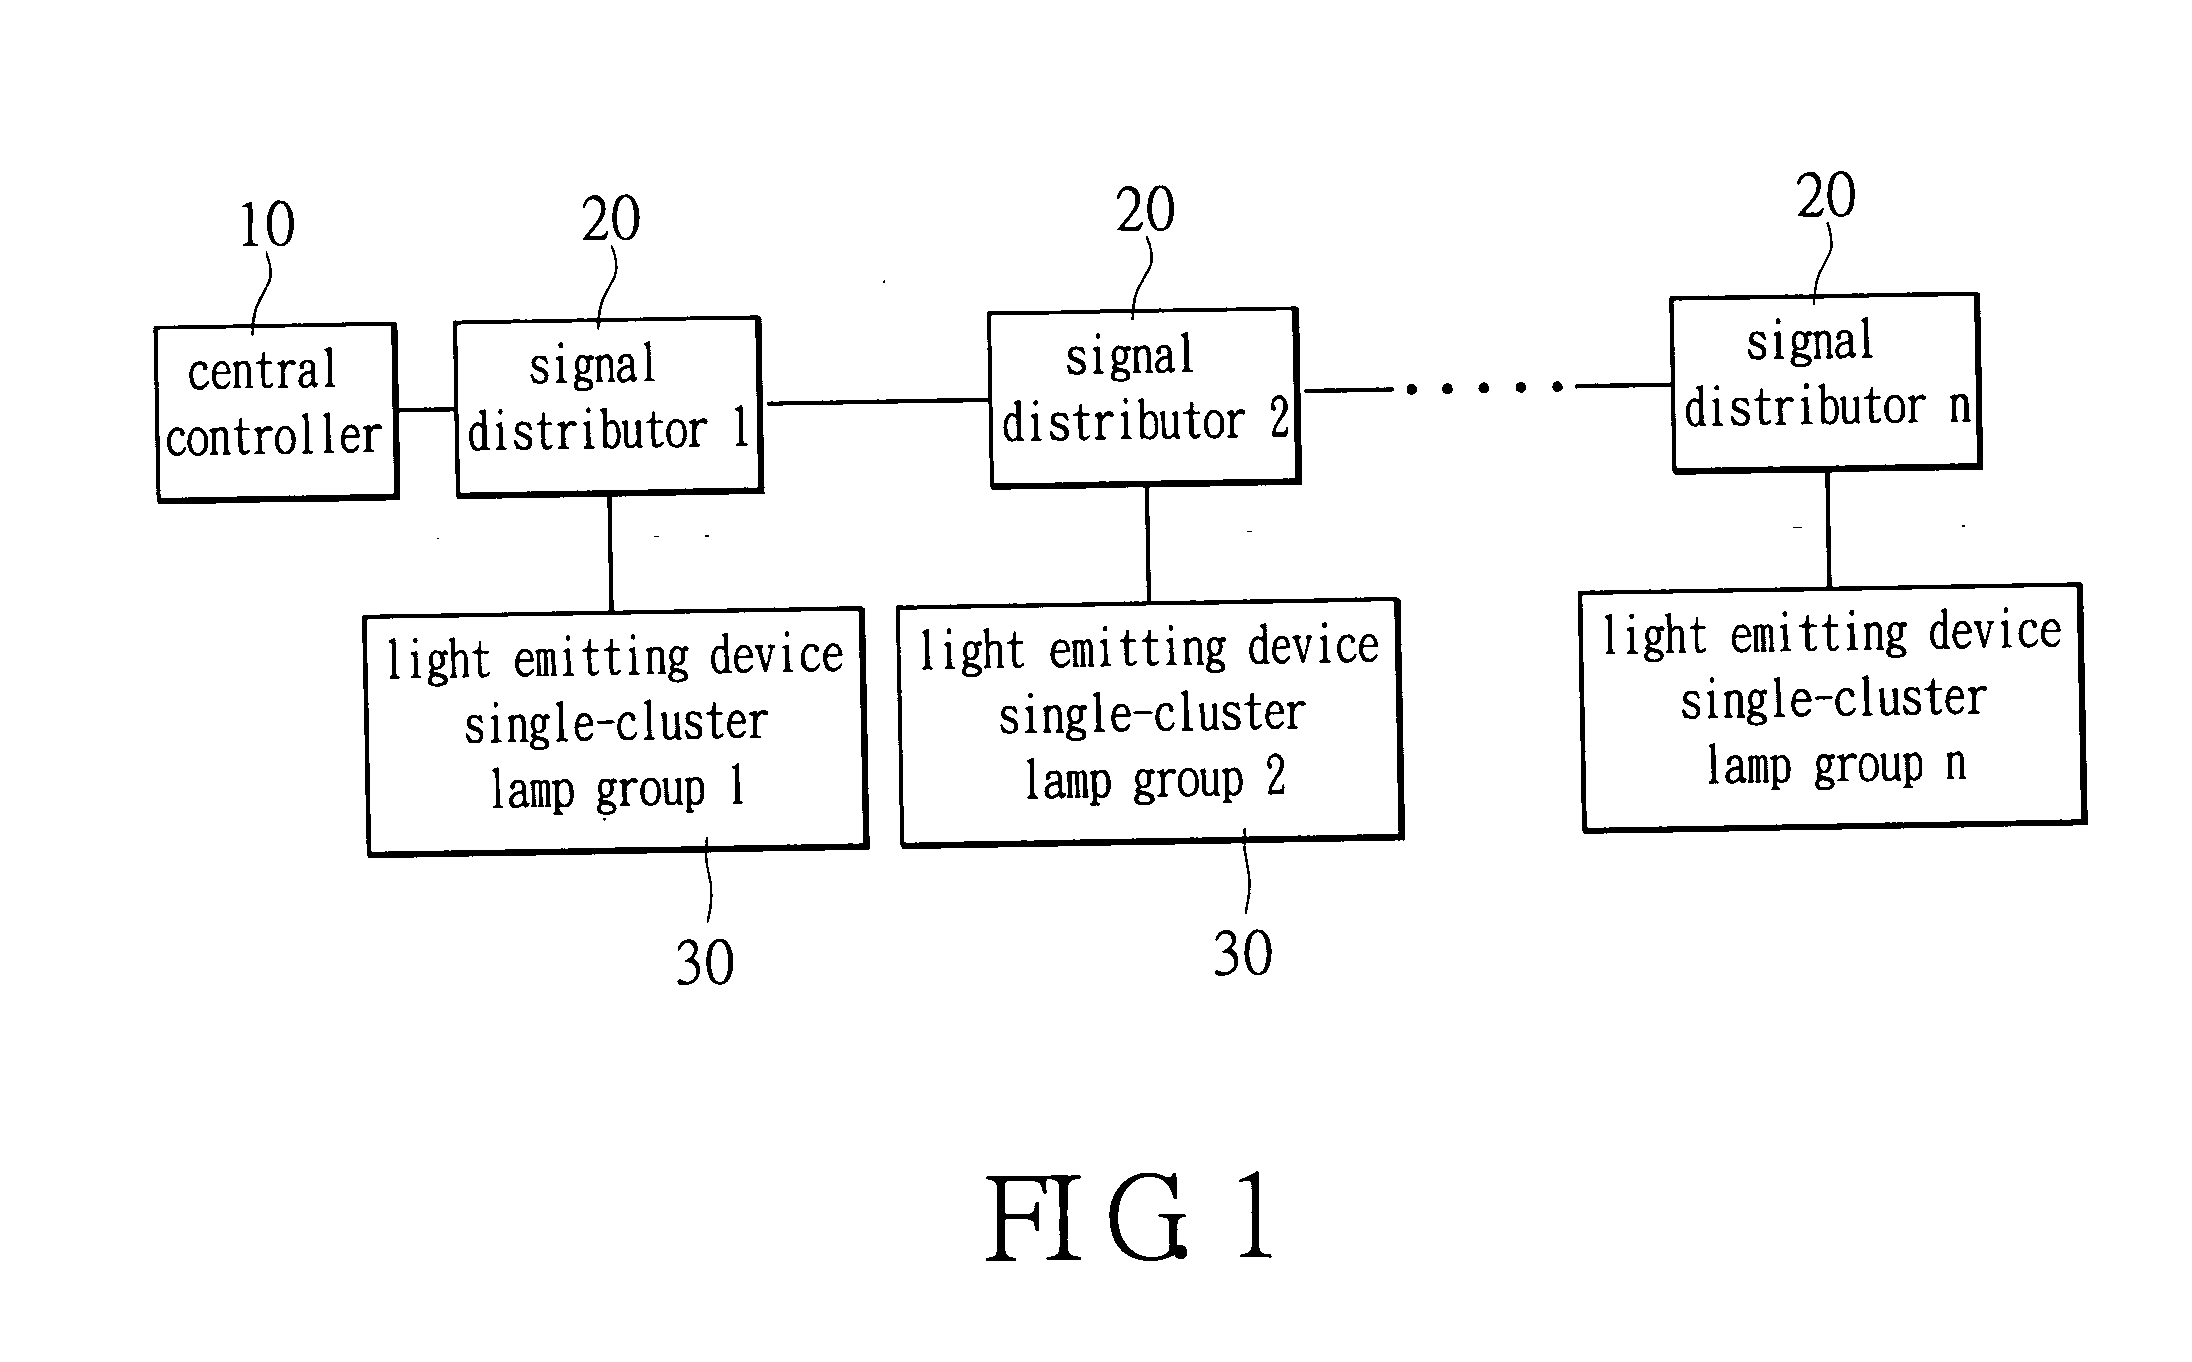 Light emitting device single-cluster lamp control system